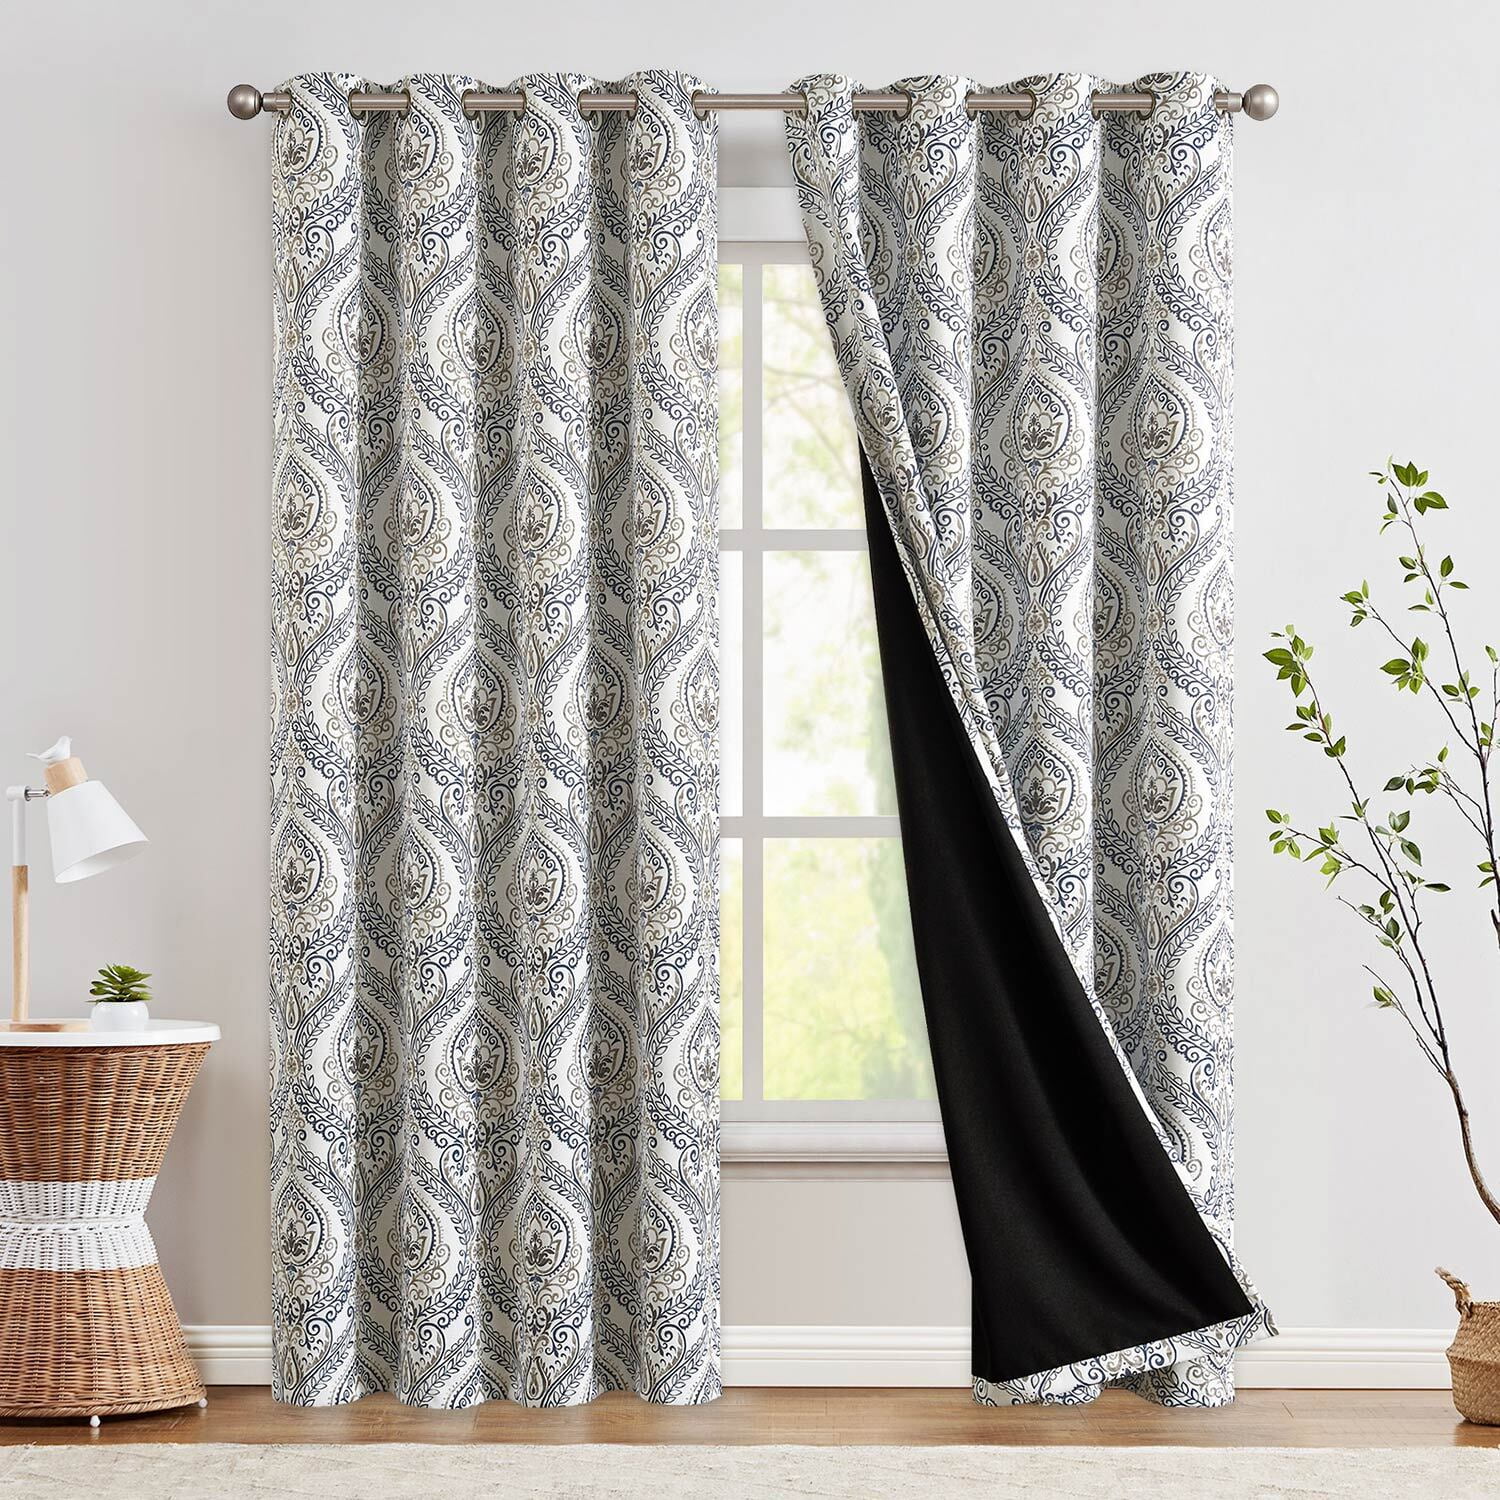 Curtainking 100 Blackout Curtains 84 In Grey Damask Medallion Window For Bedroom Grommet Thermal Insulated Ds Living Room Vintage Luxury Treatments Set 2 Panels Com